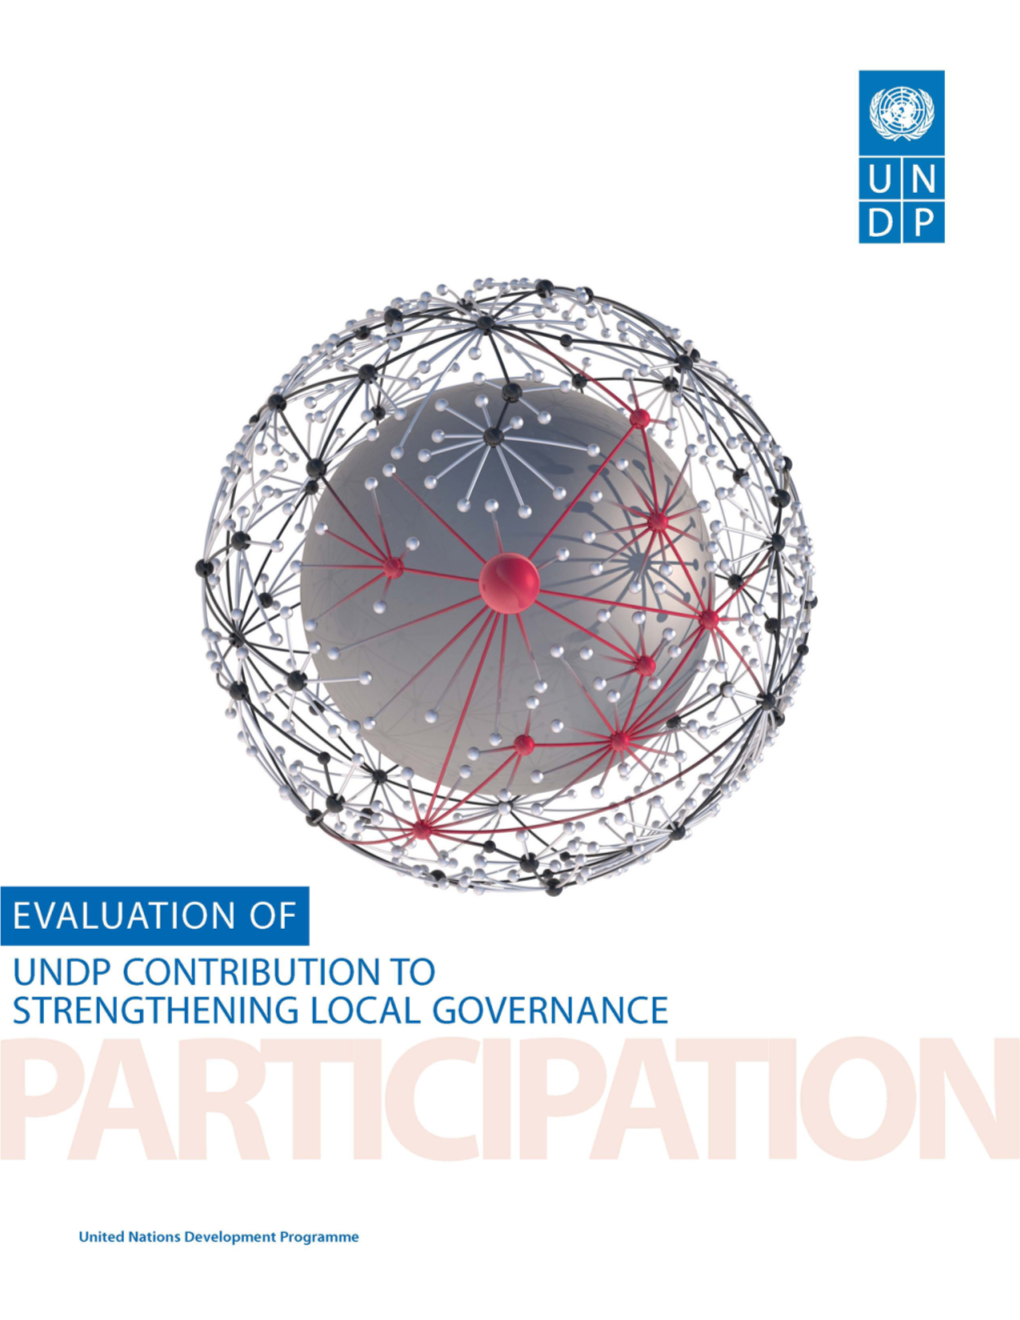 Evaluation of UNPD Contribution to Strengthening Local Governance